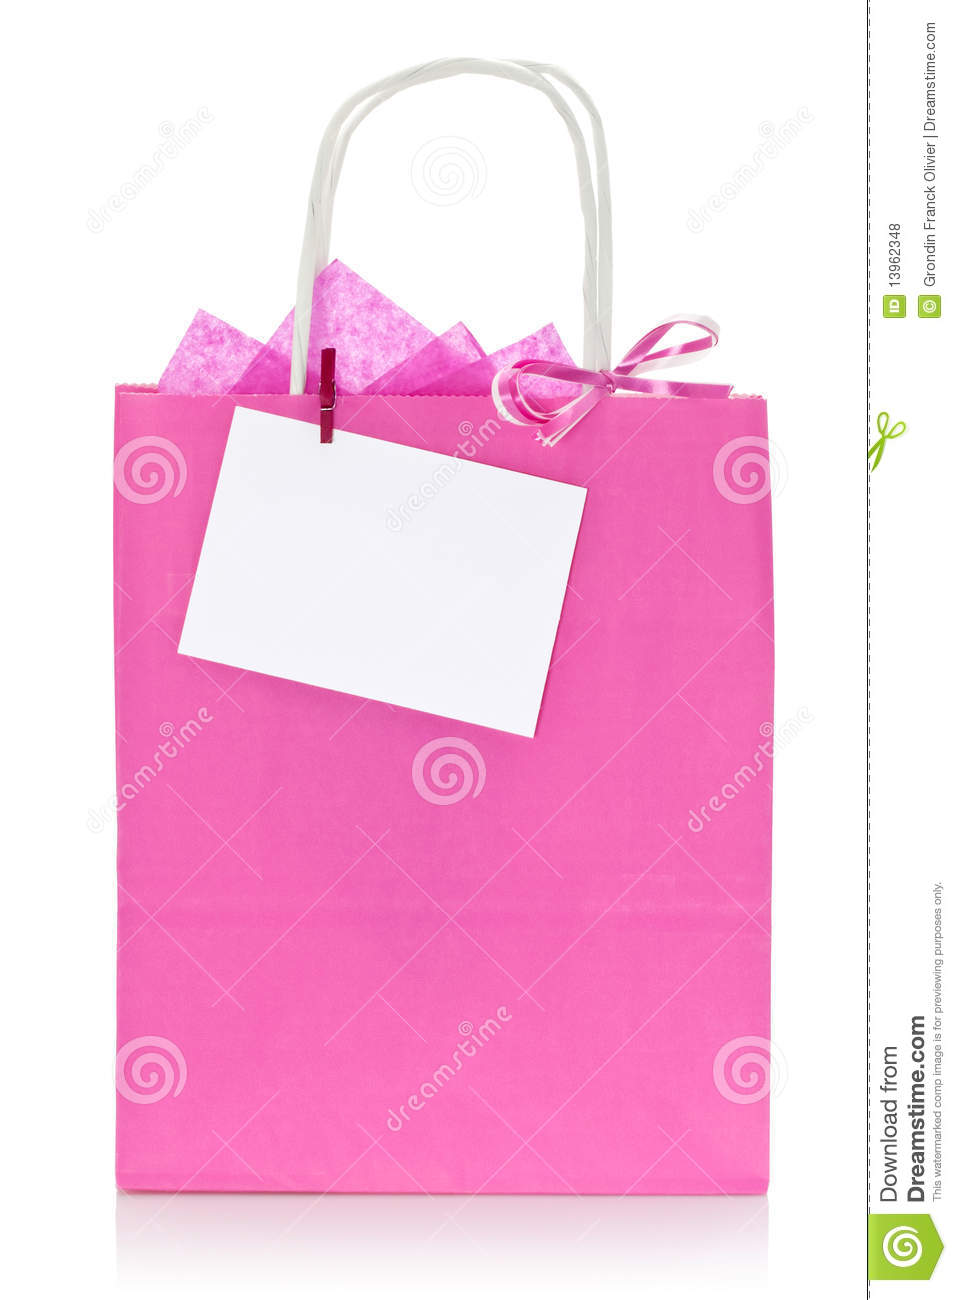 Pink Shopping Bag With Tag Royalty Free Stock Photos   Image  13962348